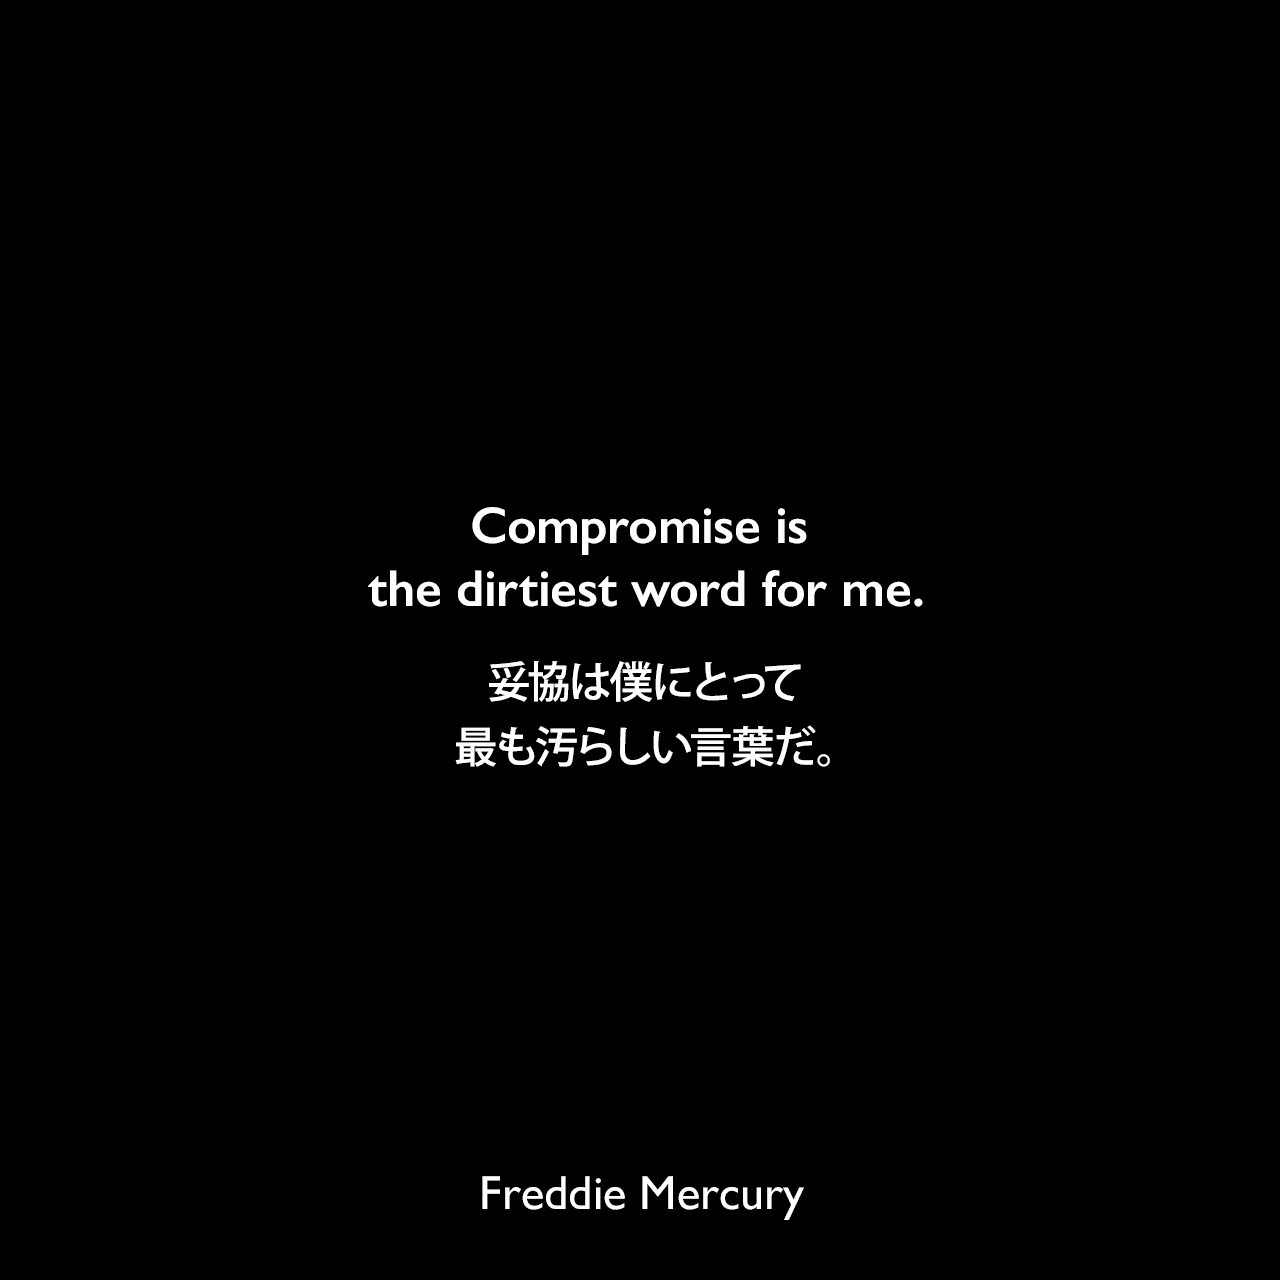 Compromise is the dirtiest word for me.妥協は僕にとって最も汚らしい言葉だ。Freddie Mercury